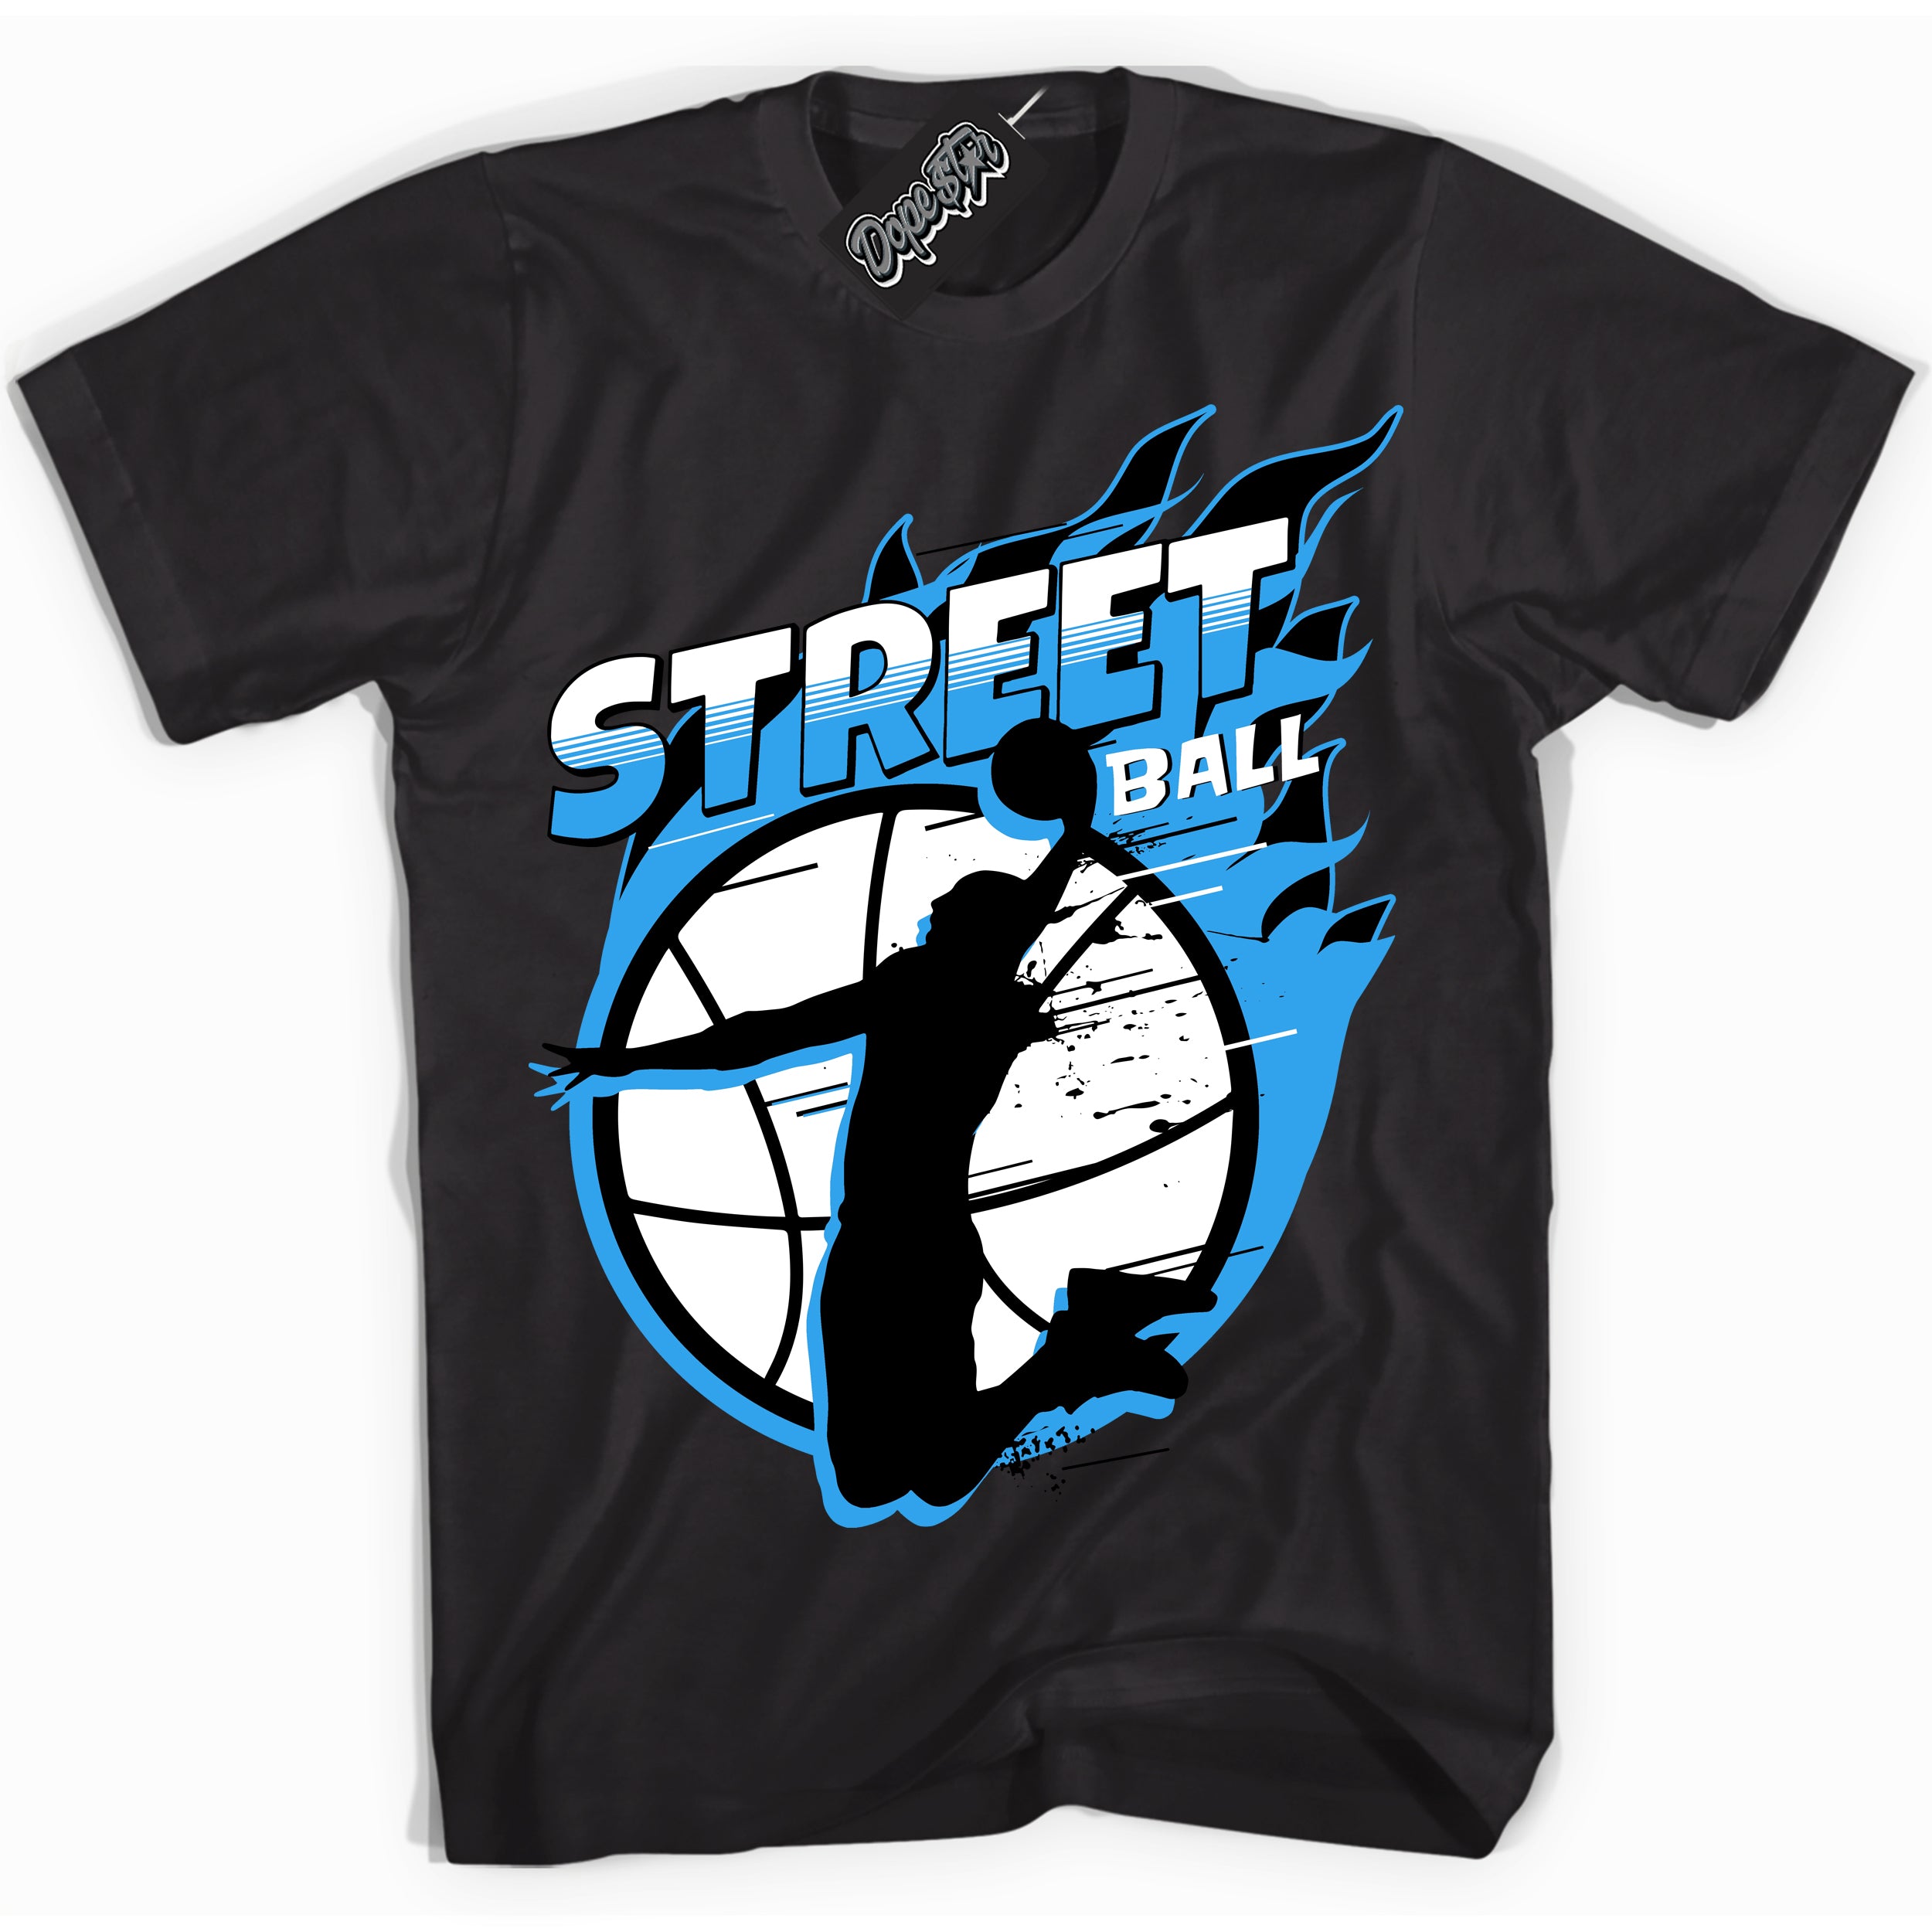 Cool Black graphic tee with “ Street Ball ” design, that perfectly matches Powder Blue 9s sneakers 